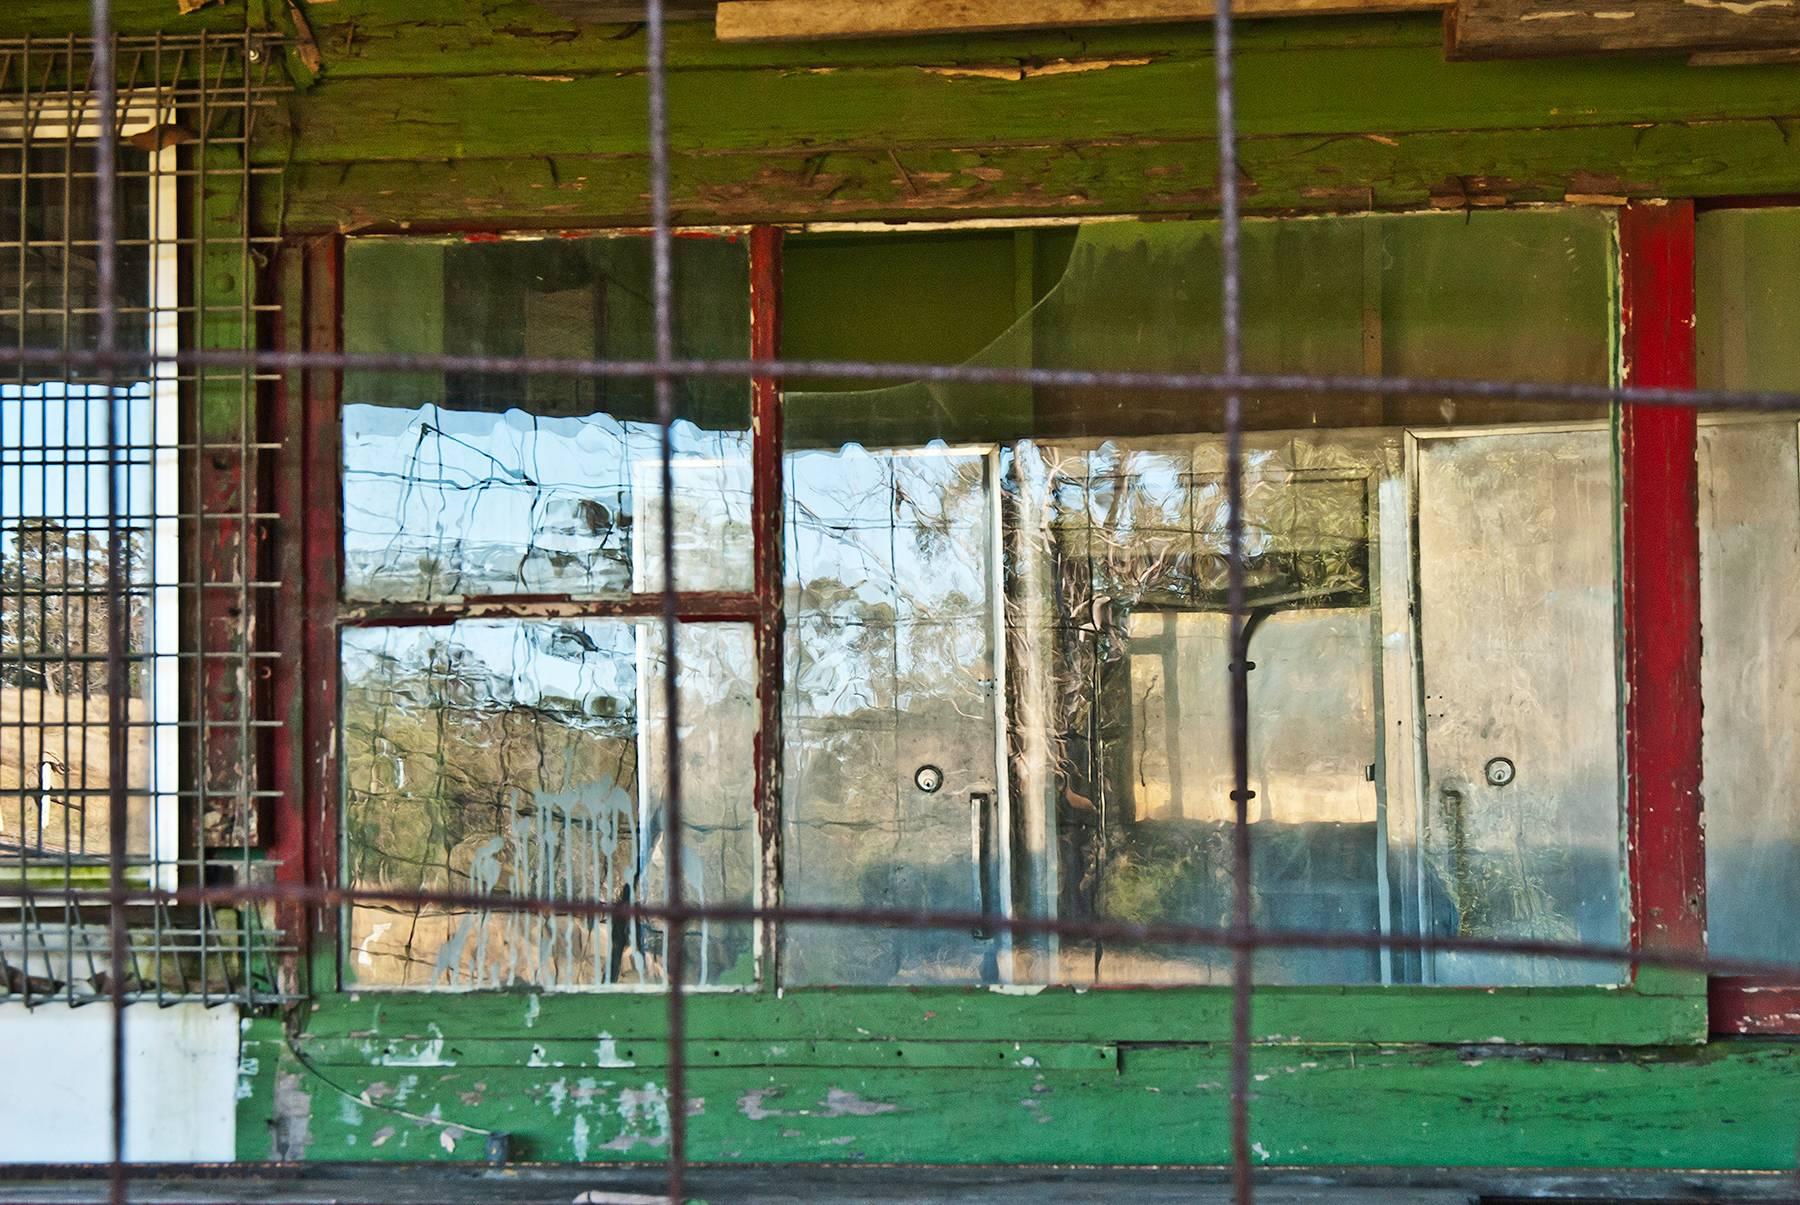 "Restructure (New South Wales)", contemporary, window, red, green, photograph